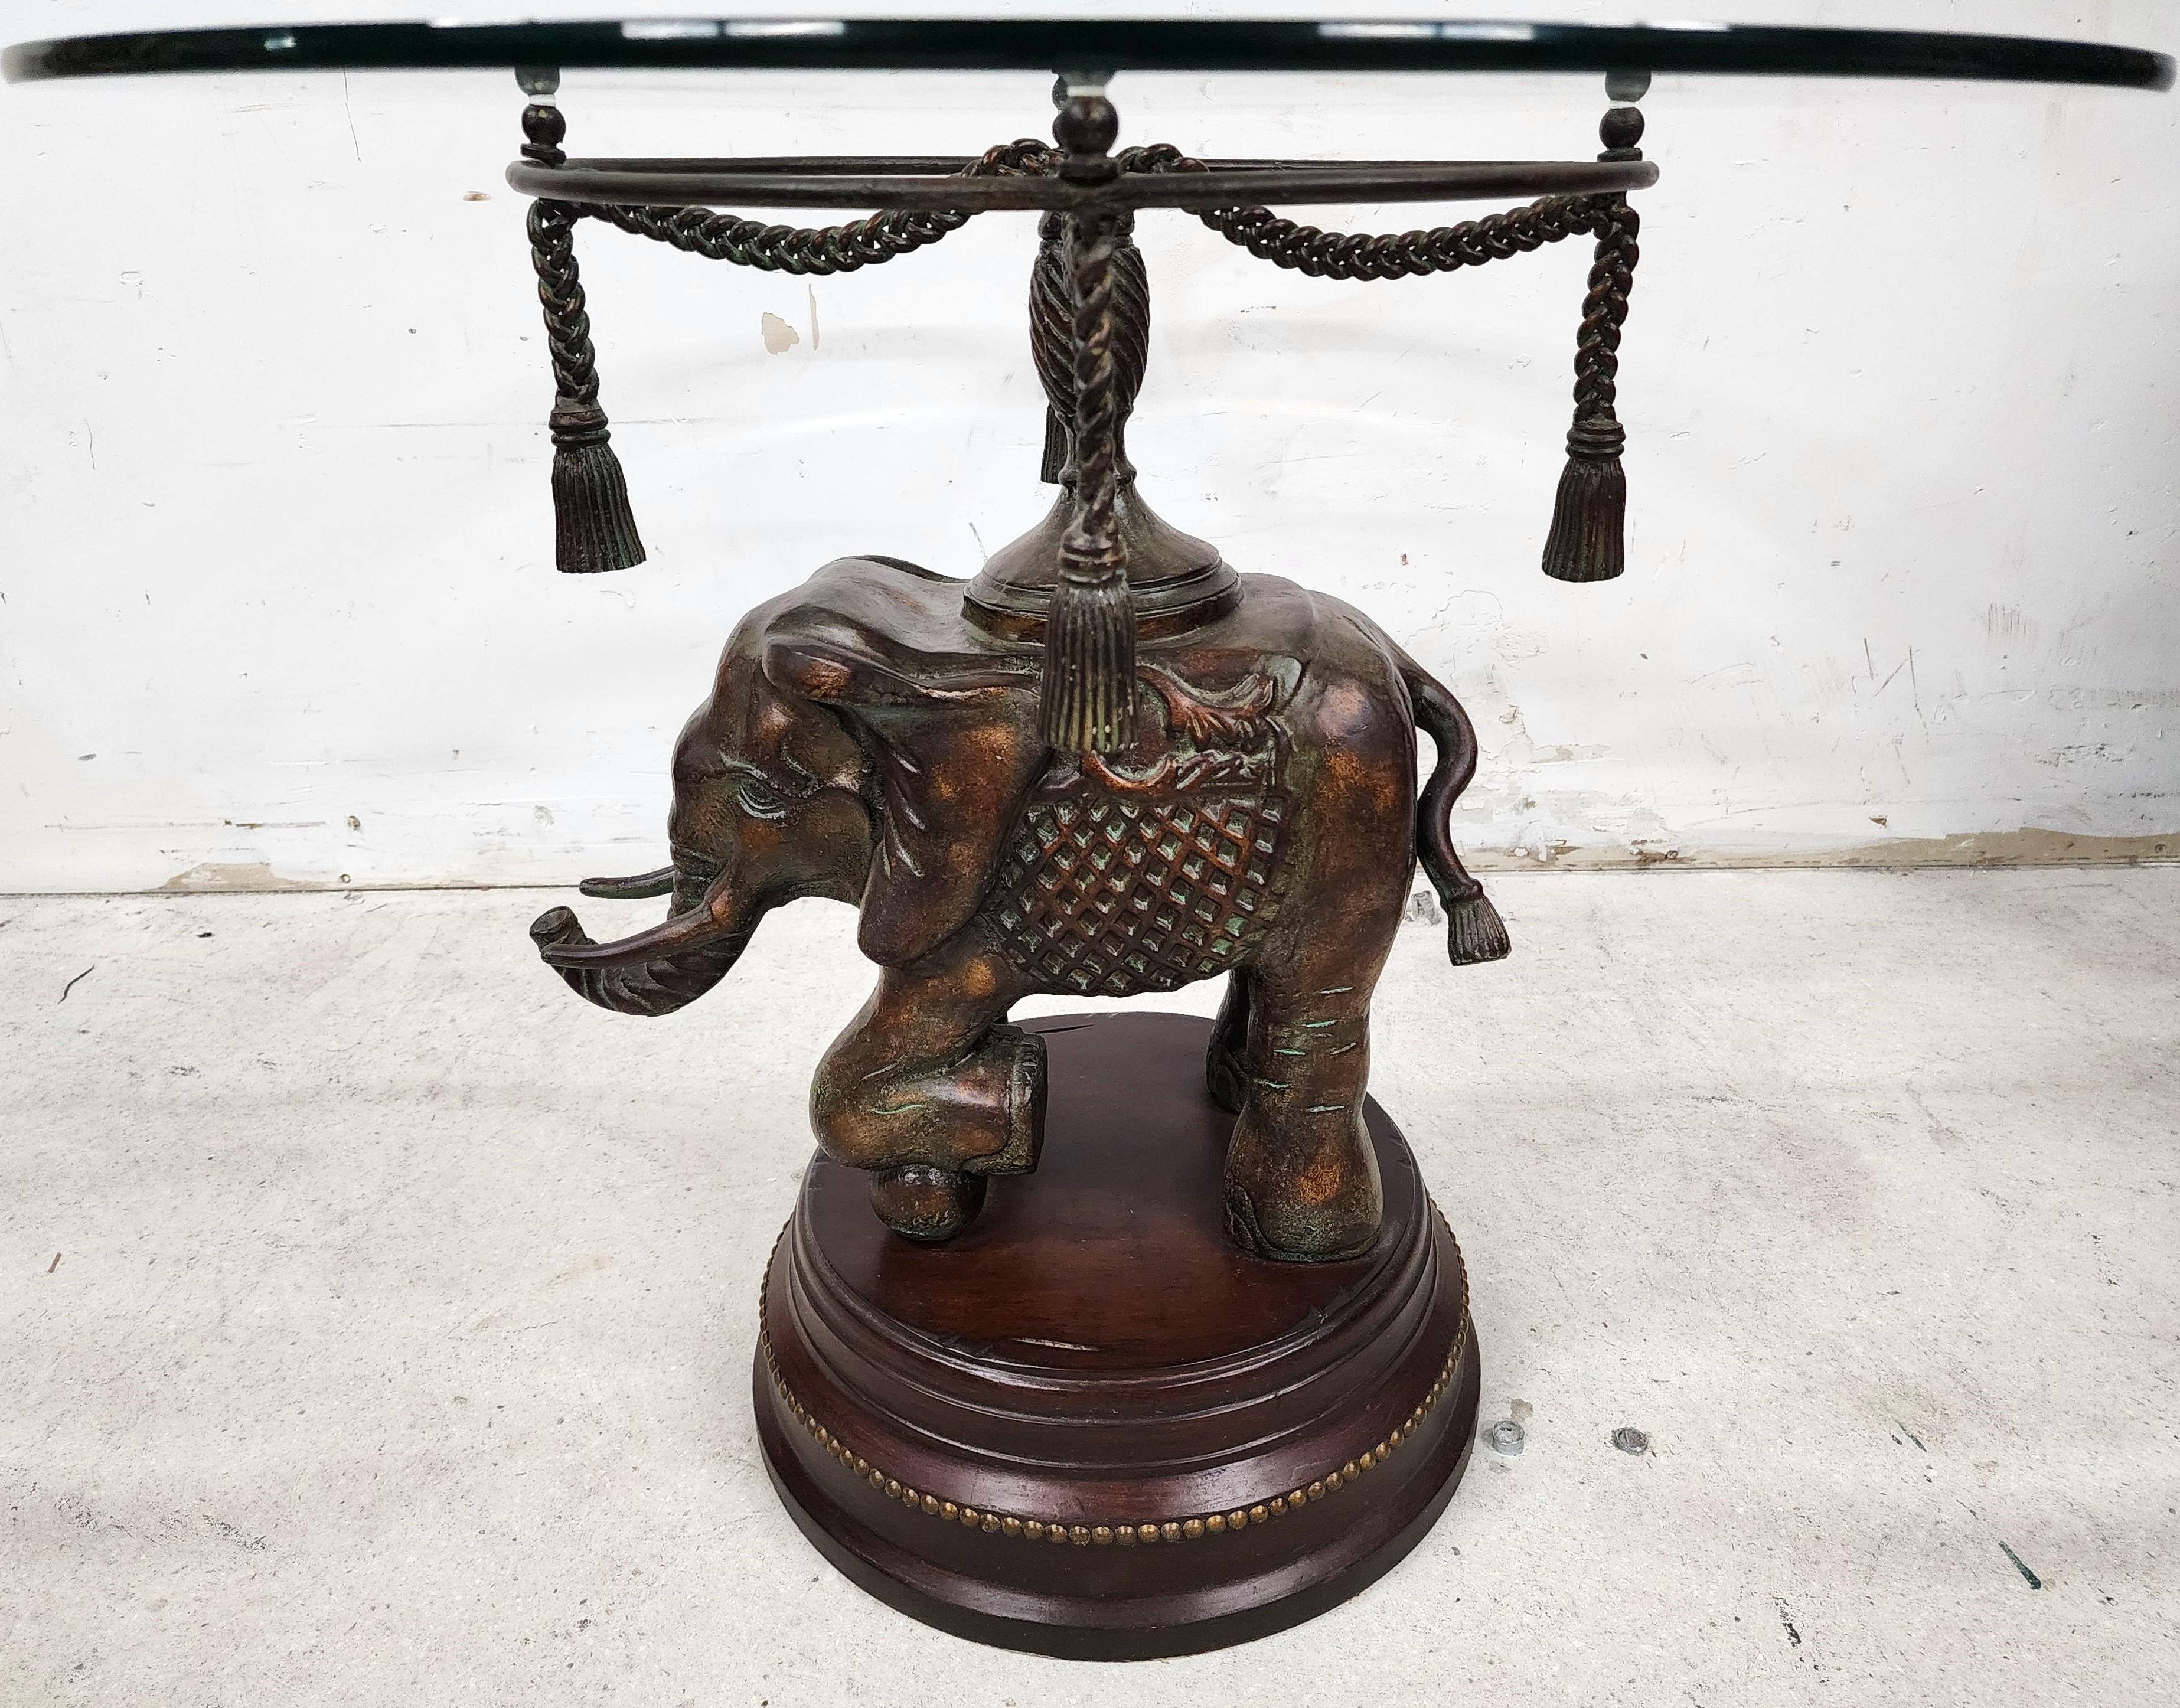 For FULL item description click on CONTINUE READING at the bottom of this page.

Offering One Of Our Recent Palm Beach Estate Fine Furniture Acquisitions Of A
Bronze elephant standing on a carved wood plinth with decorative brass nail head trim.